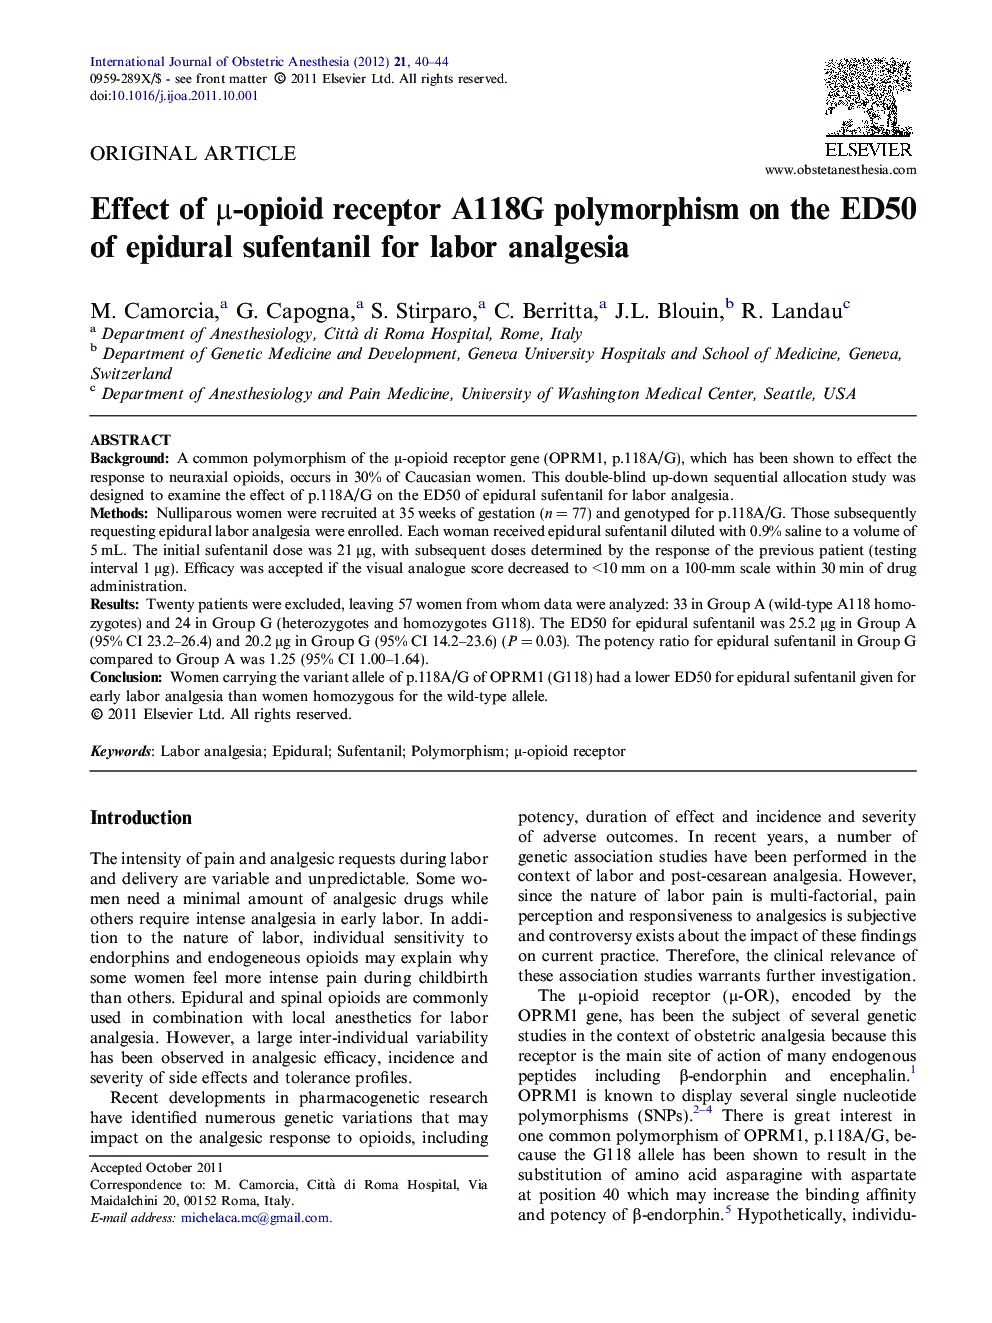 Effect of μ-opioid receptor A118G polymorphism on the ED50 of epidural sufentanil for labor analgesia